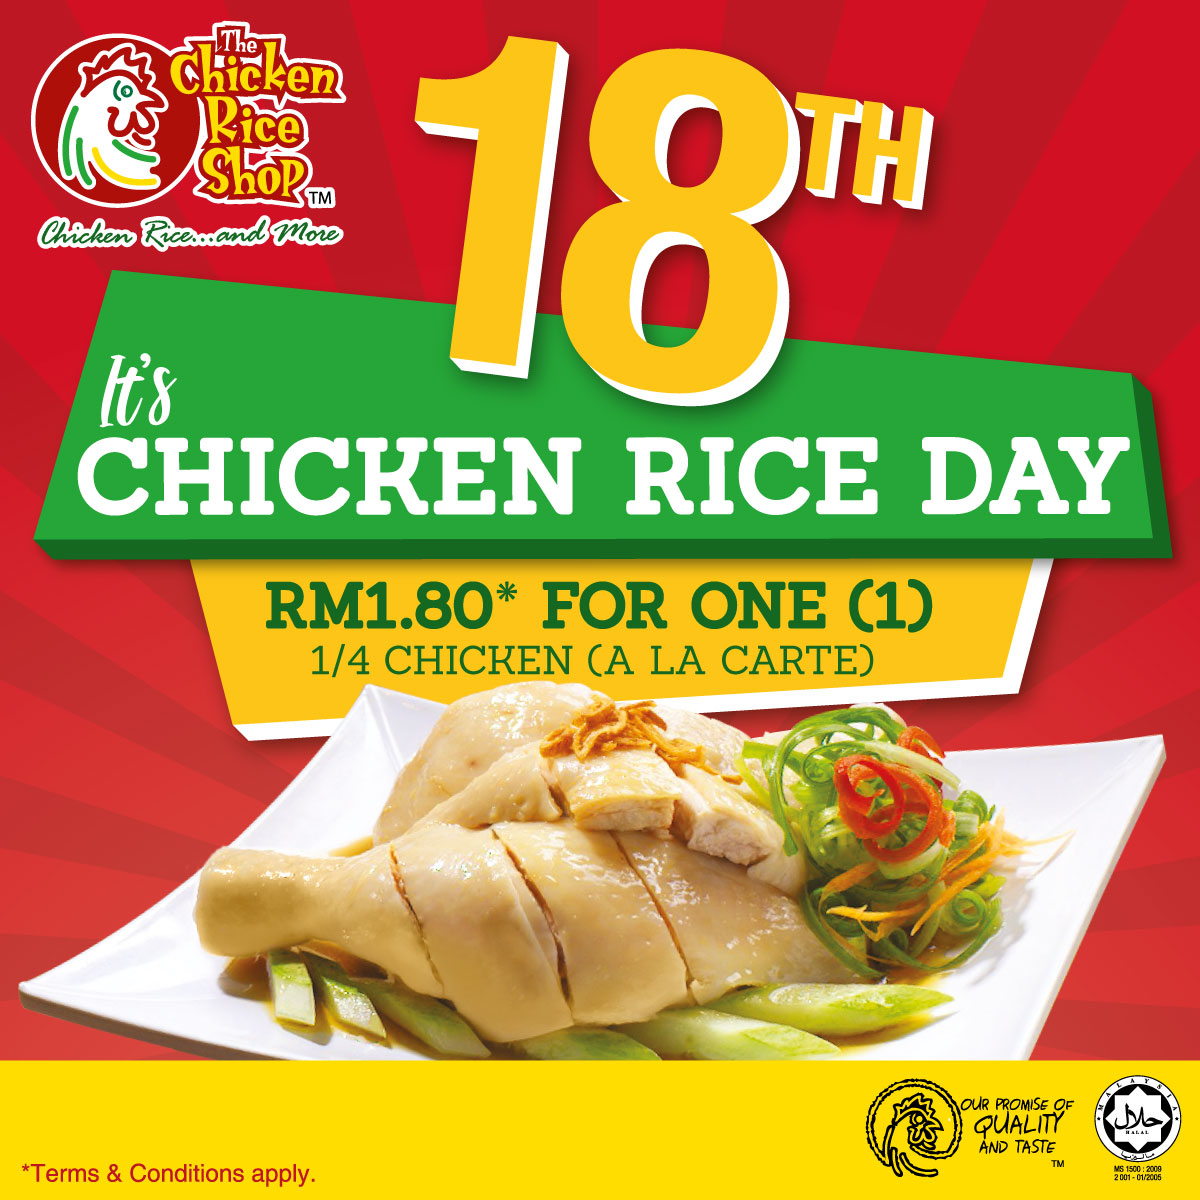 TCRS Chicken Rice Day on 18th Every Month Promotion Inbox